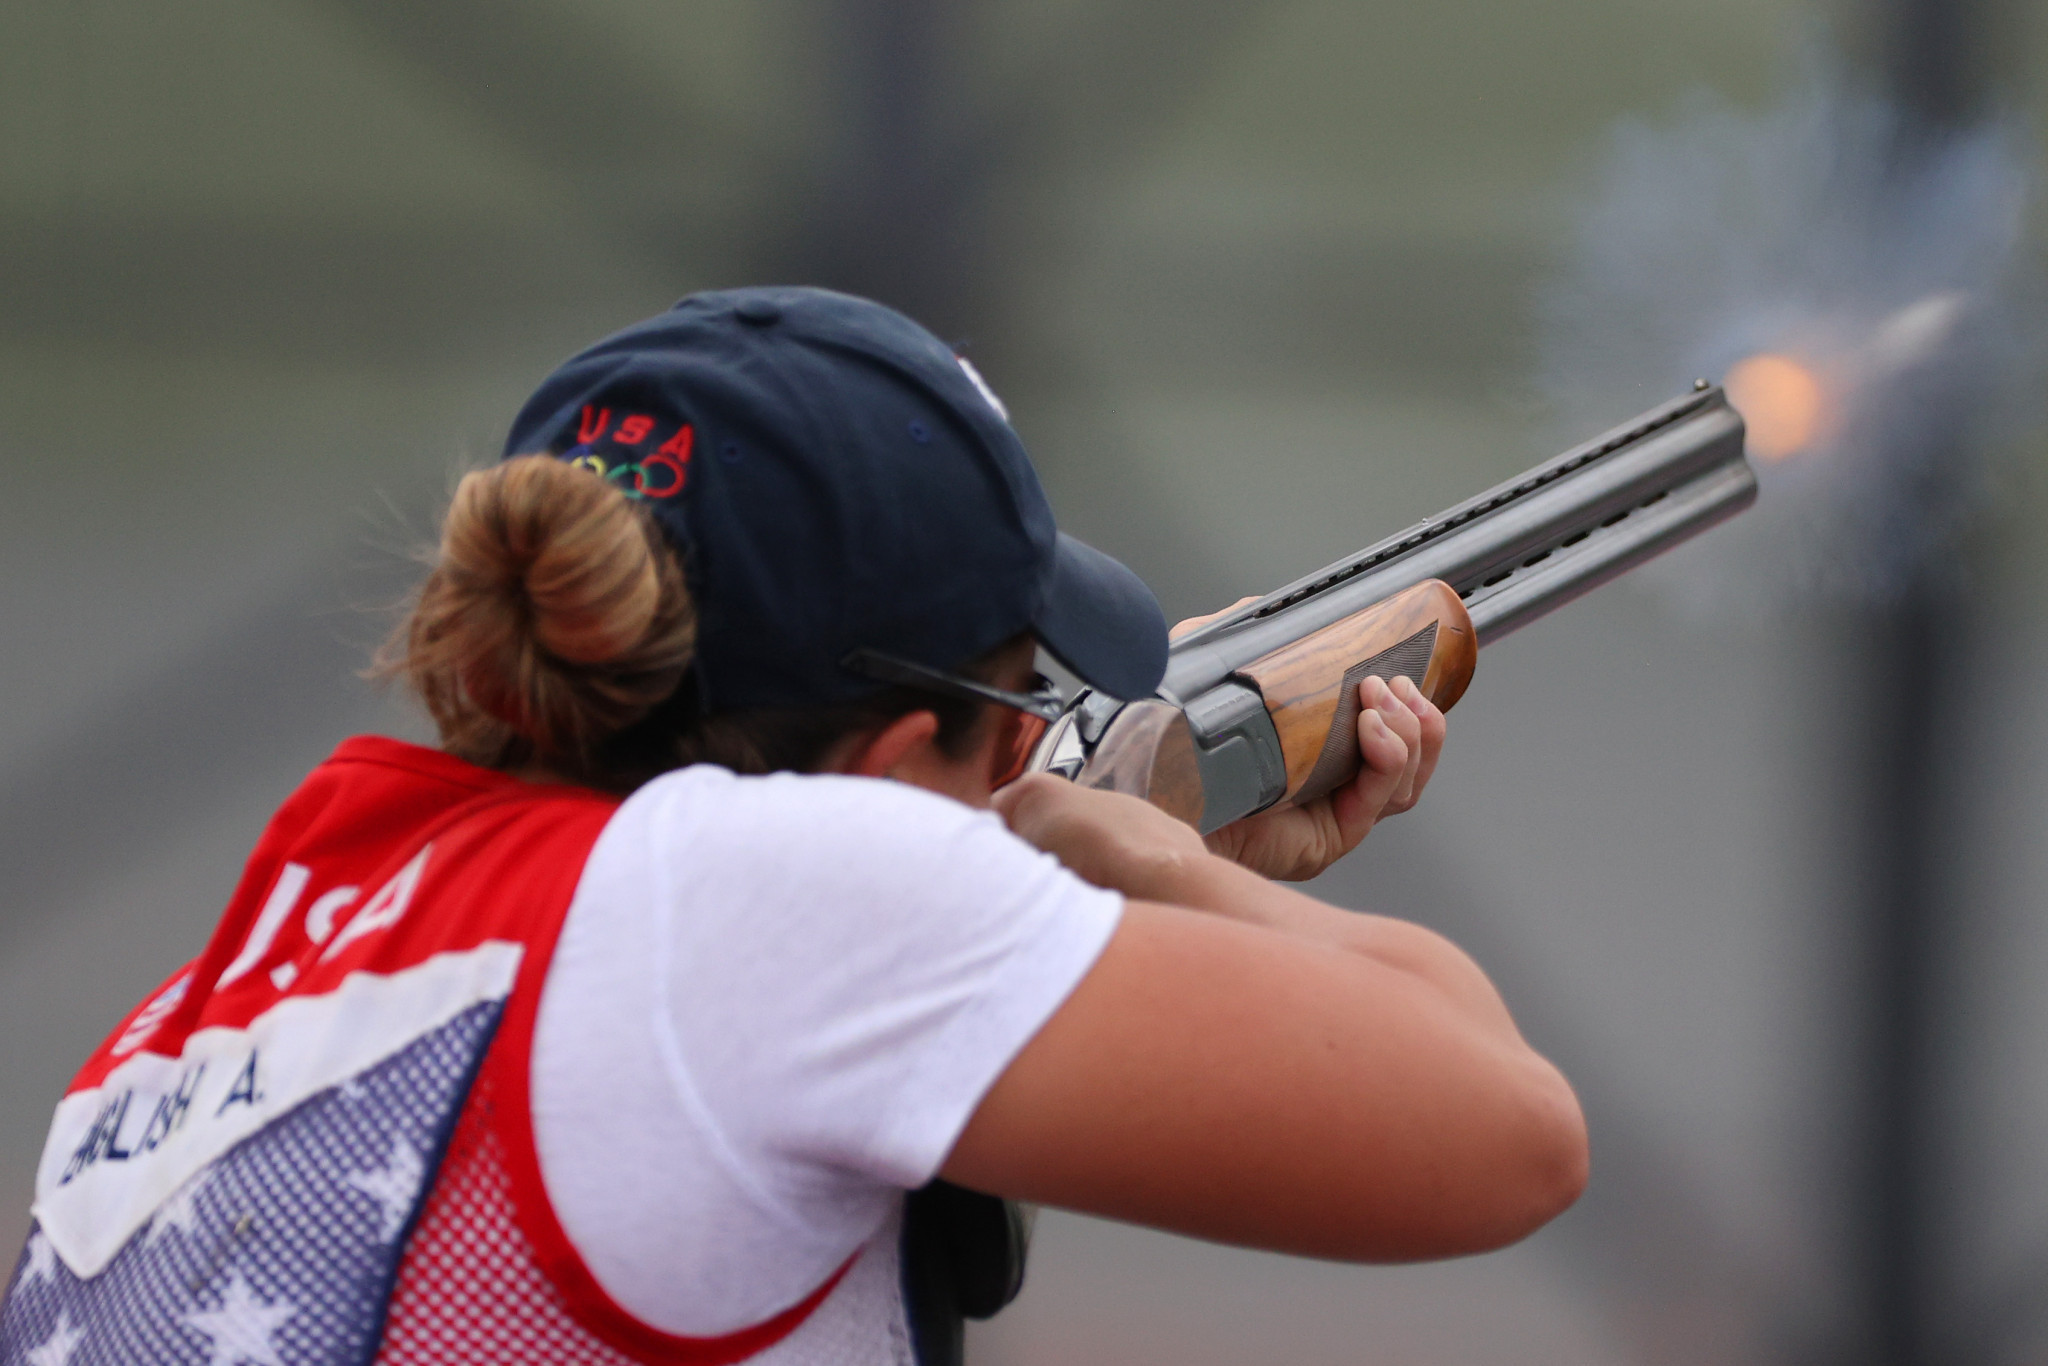 United States and Czech Republic earn team skeet titles at ISSF World Cup in Lonato